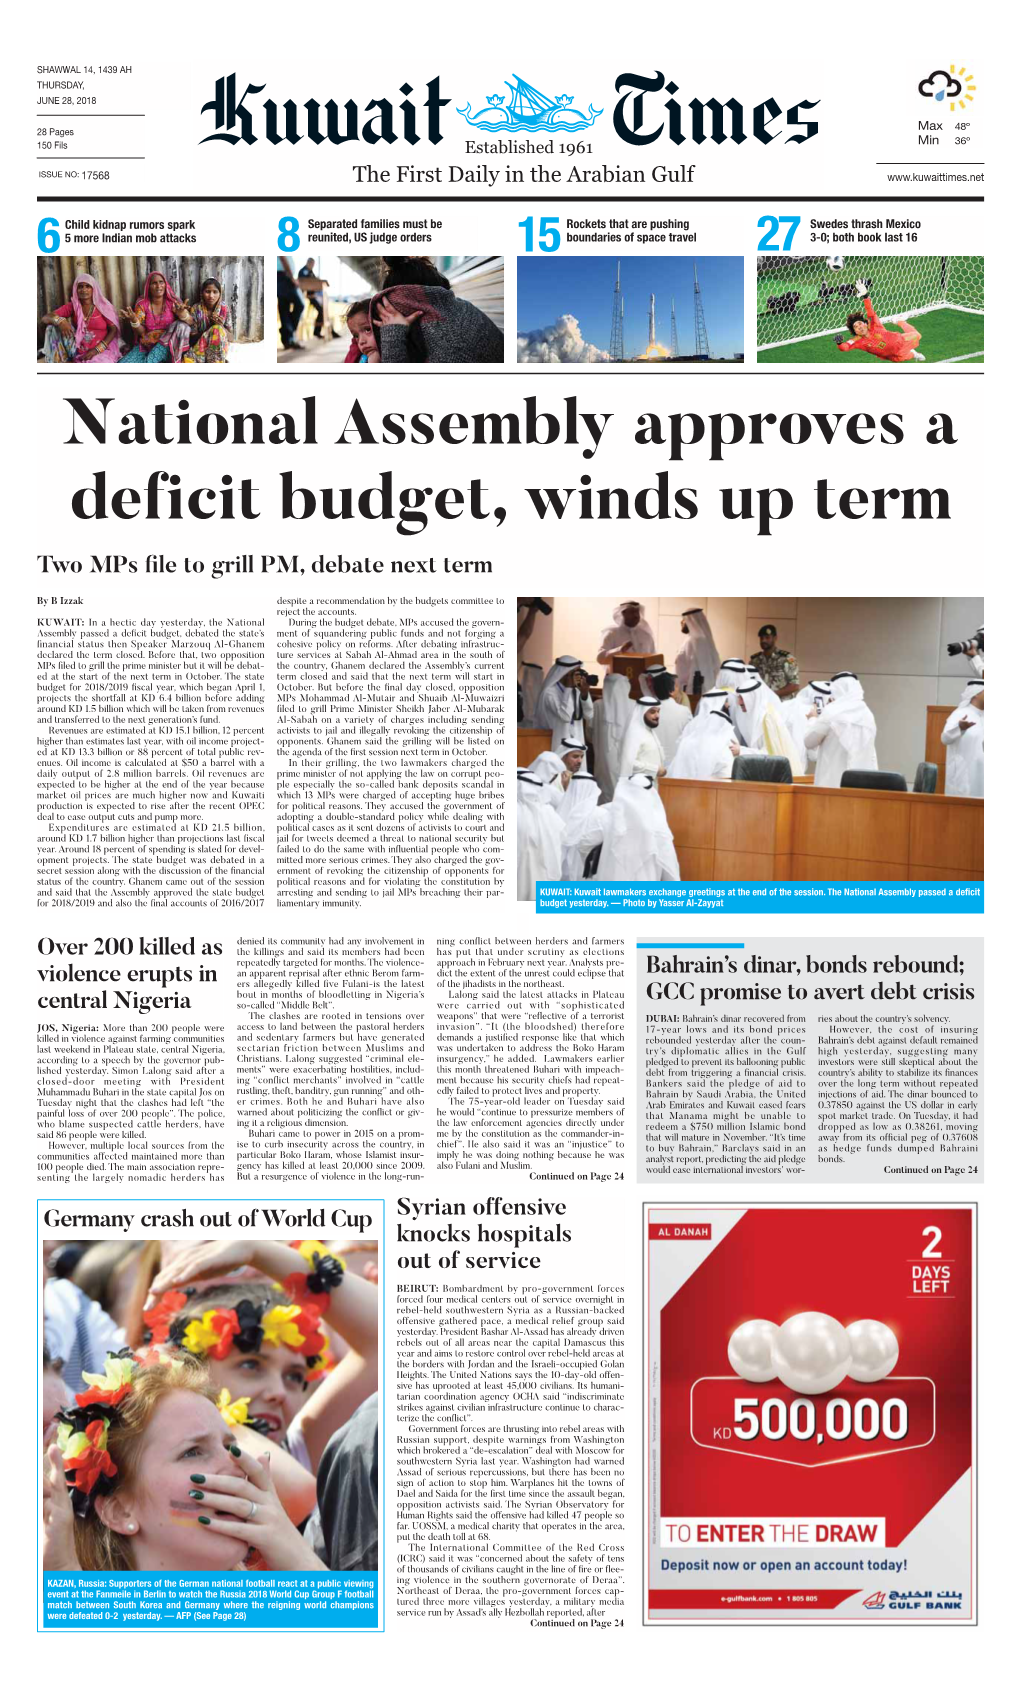 National Assembly Approves a Deficit Budget, Winds up Term Two Mps File to Grill PM, Debate Next Term